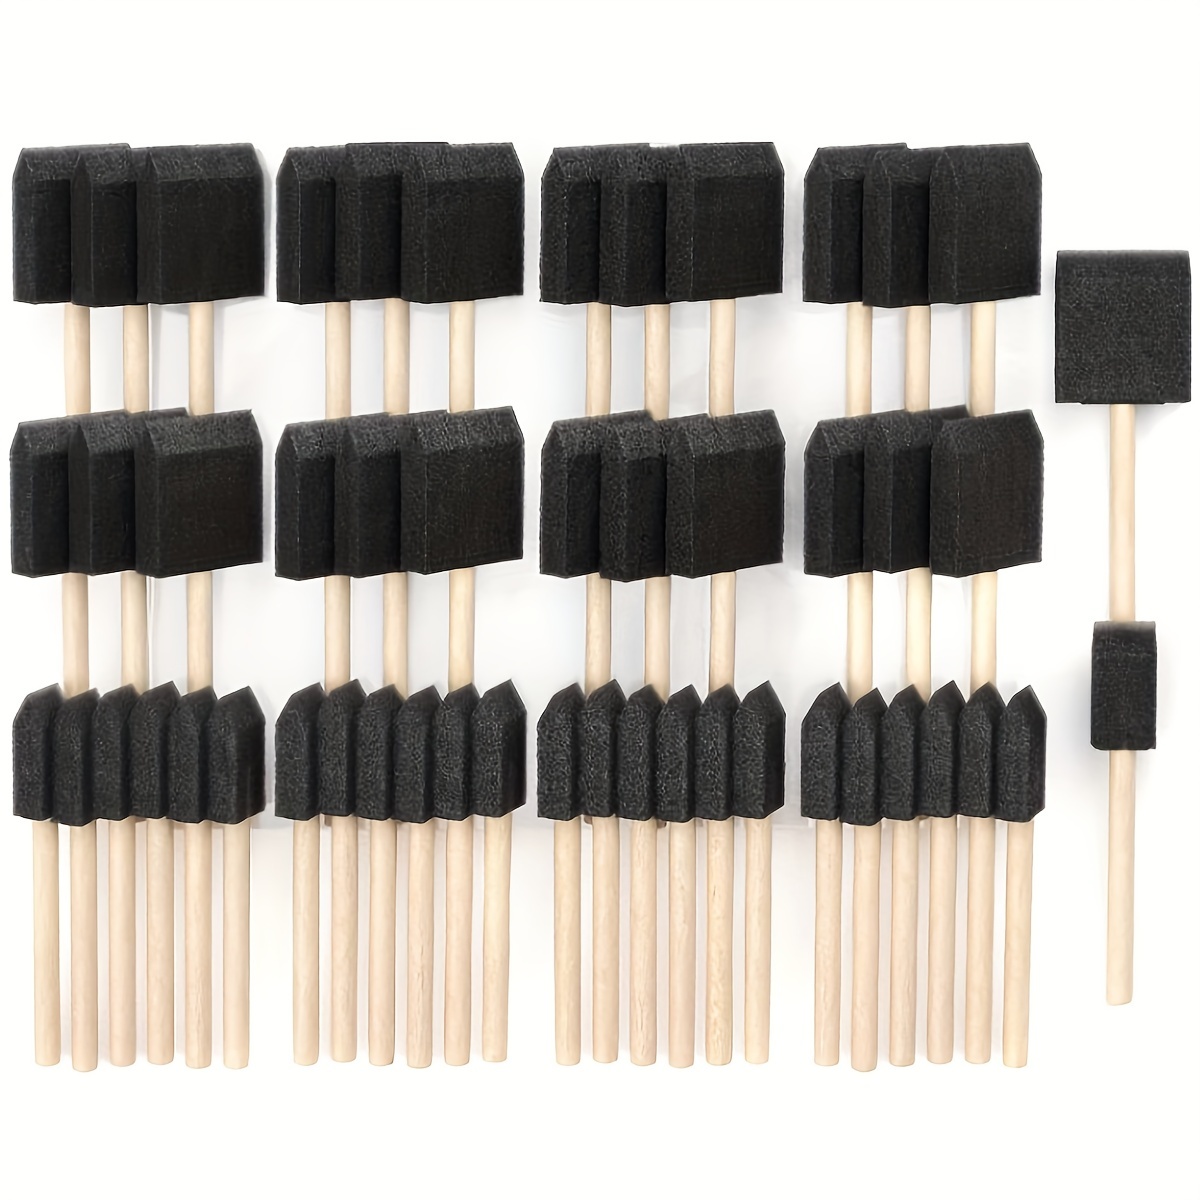 2 inch Foam Sponge Wood Handle Paint Brush Set (Value Pack of 40) -  Lightweight and durable, 2 inch - Pack of 40 - Kroger